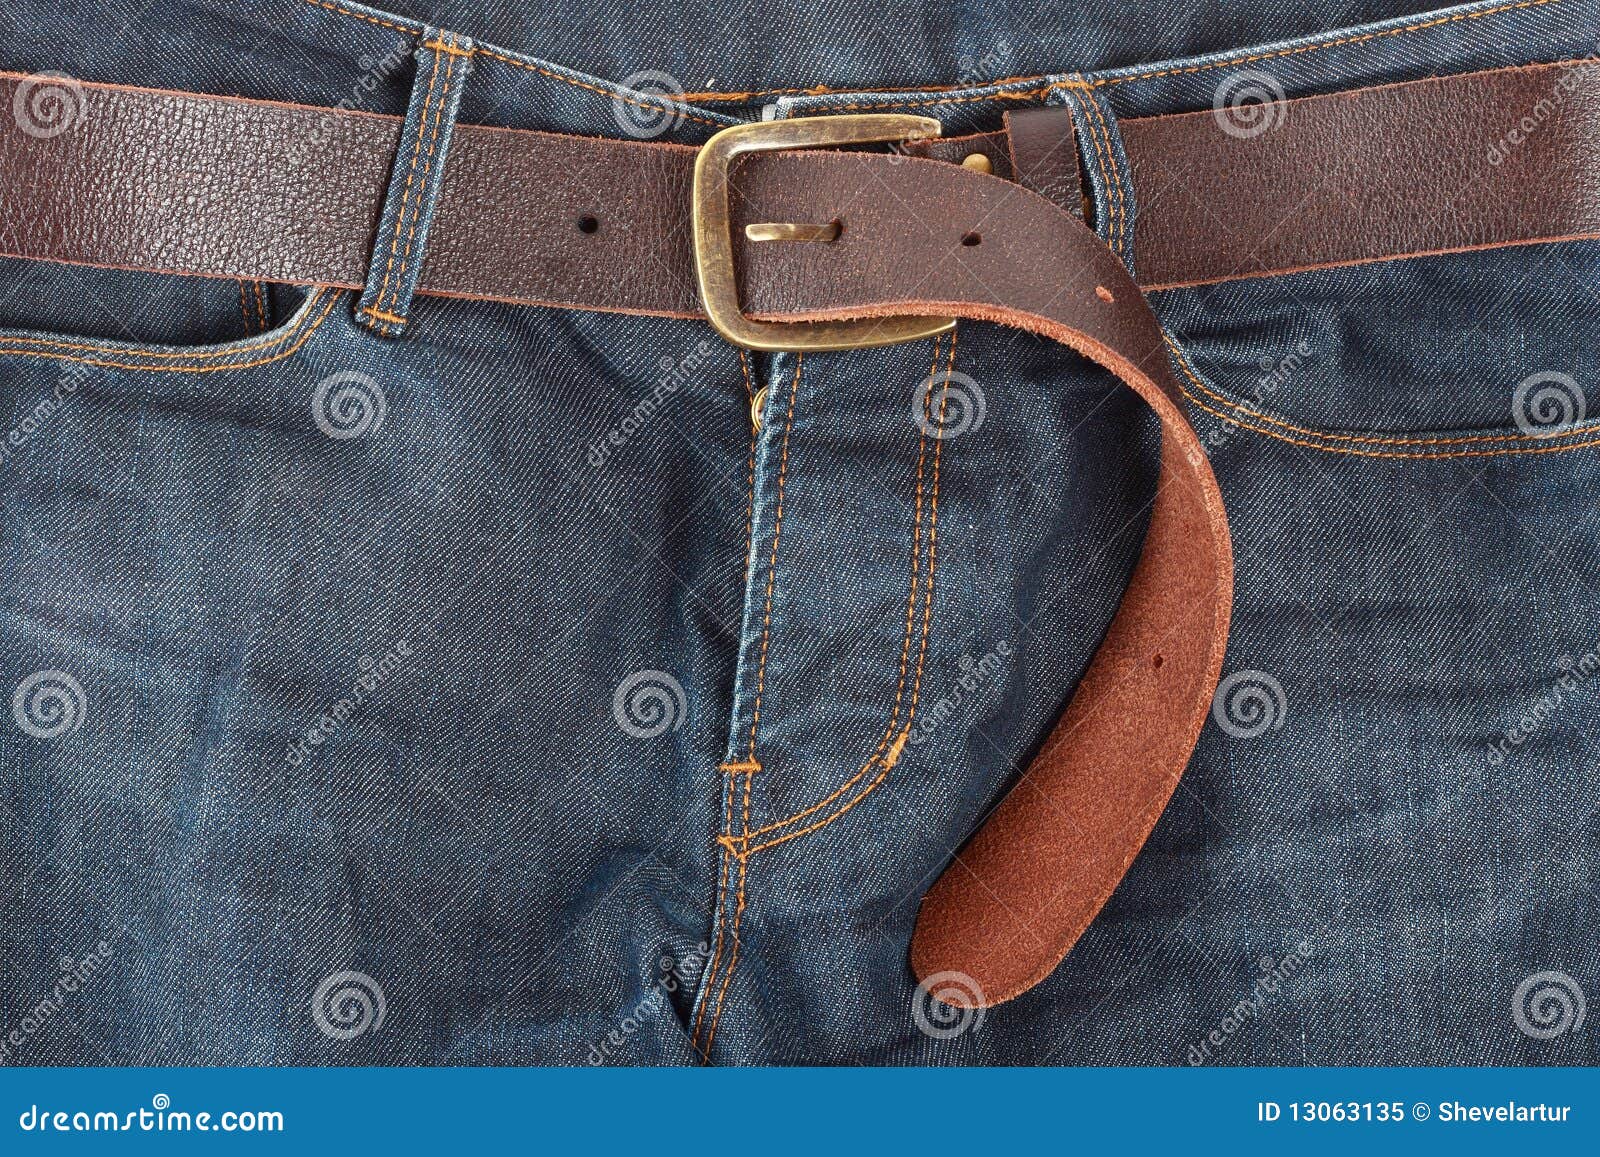 Best Of blue belt with jeans How to wear a wide belt with jeans